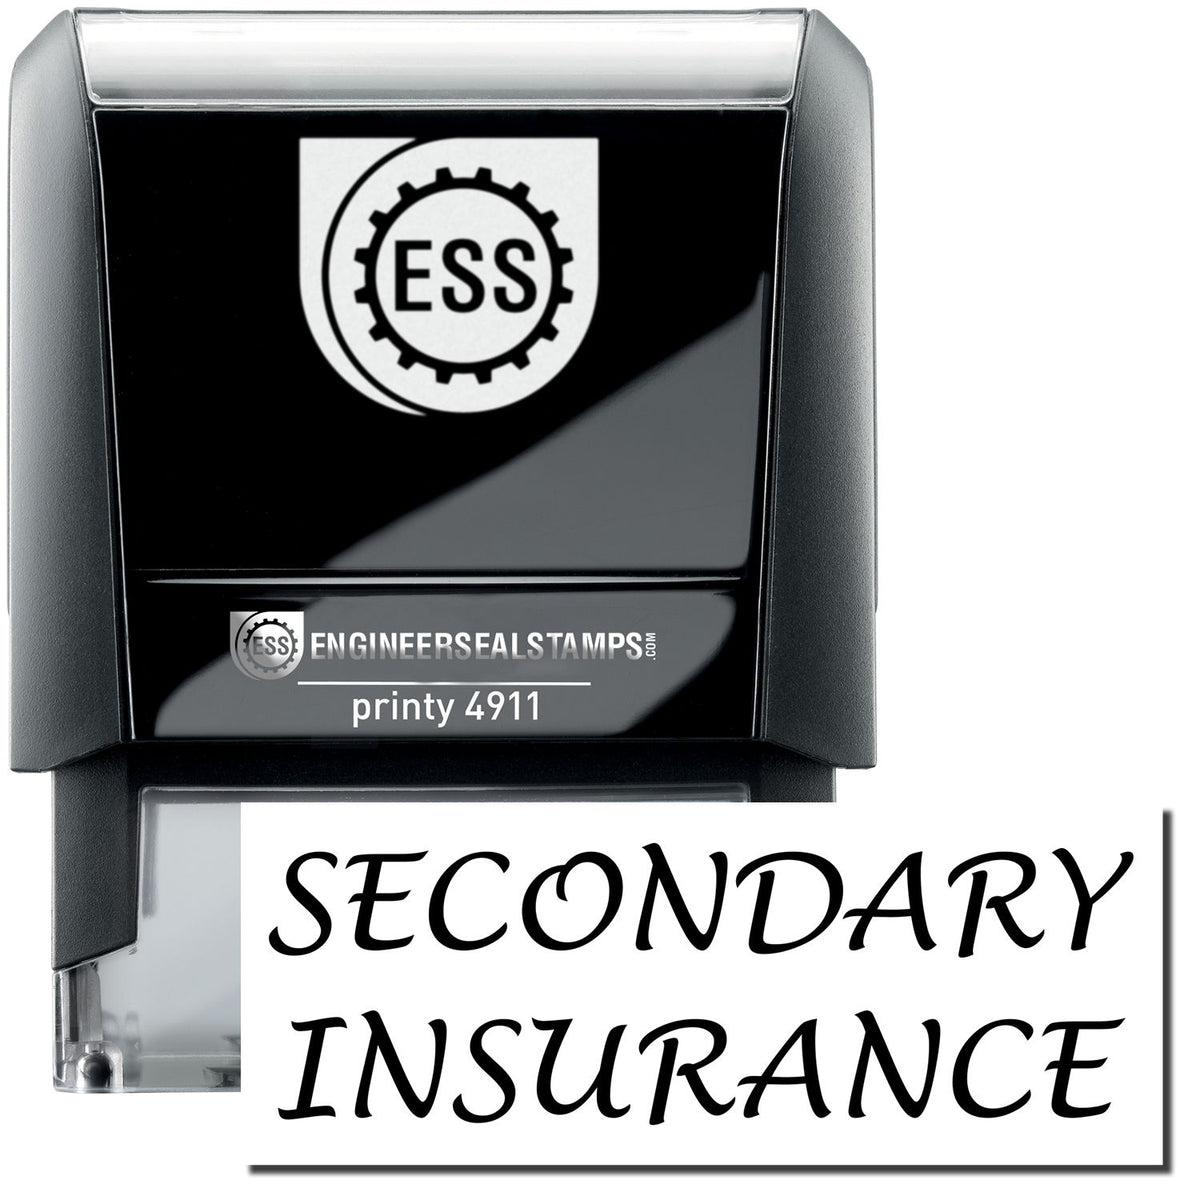 A self-inking stamp with a stamped image showing how the text &quot;SECONDARY INSURANCE&quot; is displayed after stamping.